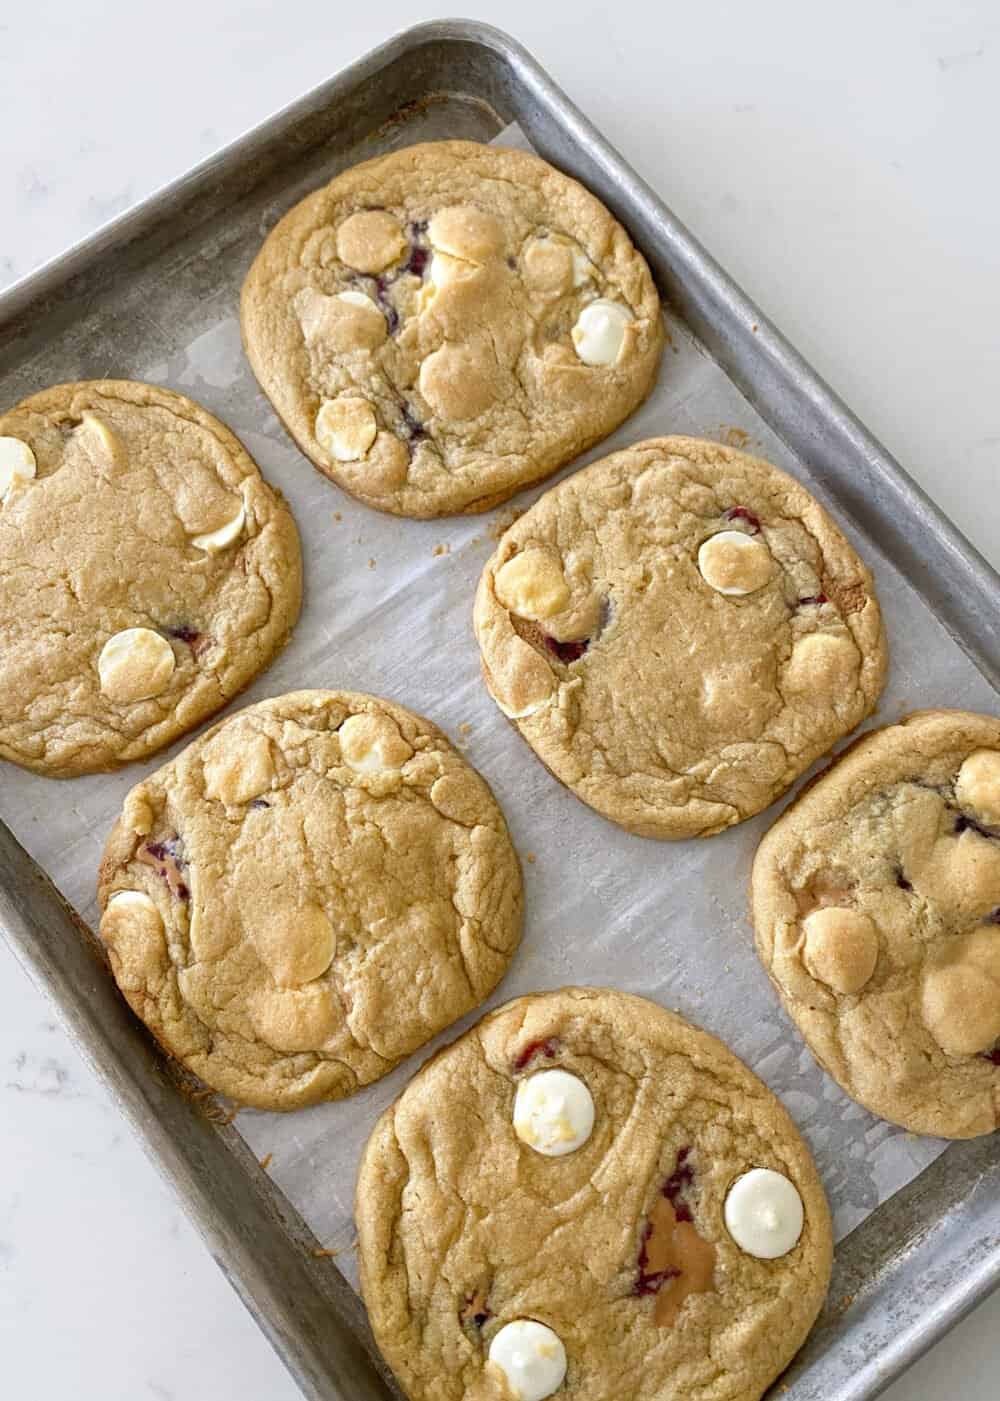 peanut butter and jelly stuffed cookies on baking sheet